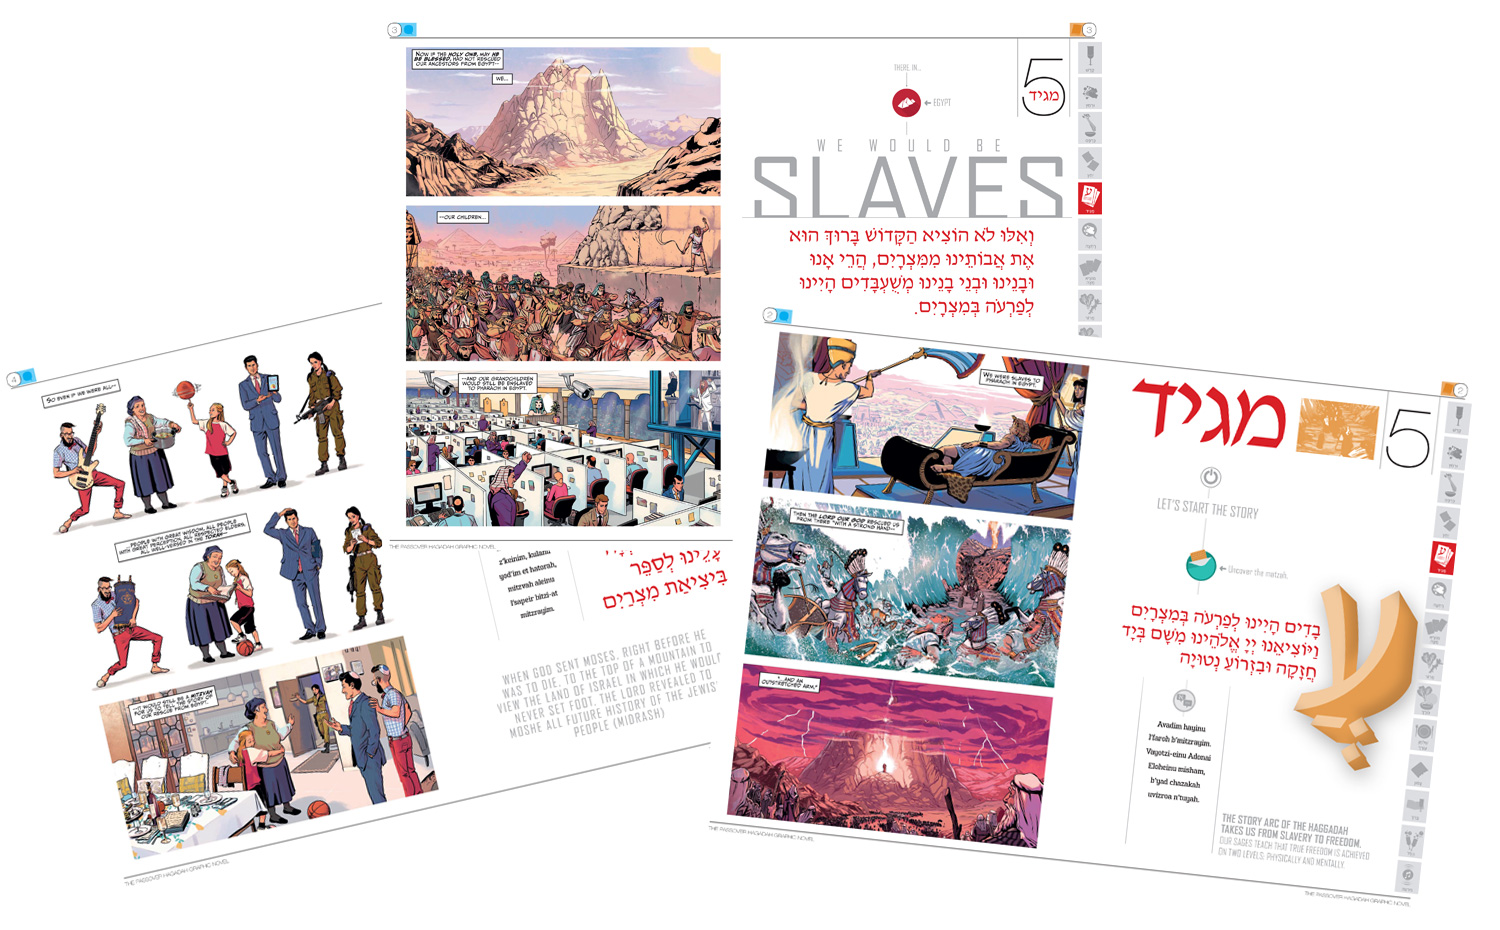 Sample pages of the Passover Haggadah Graphic Novel